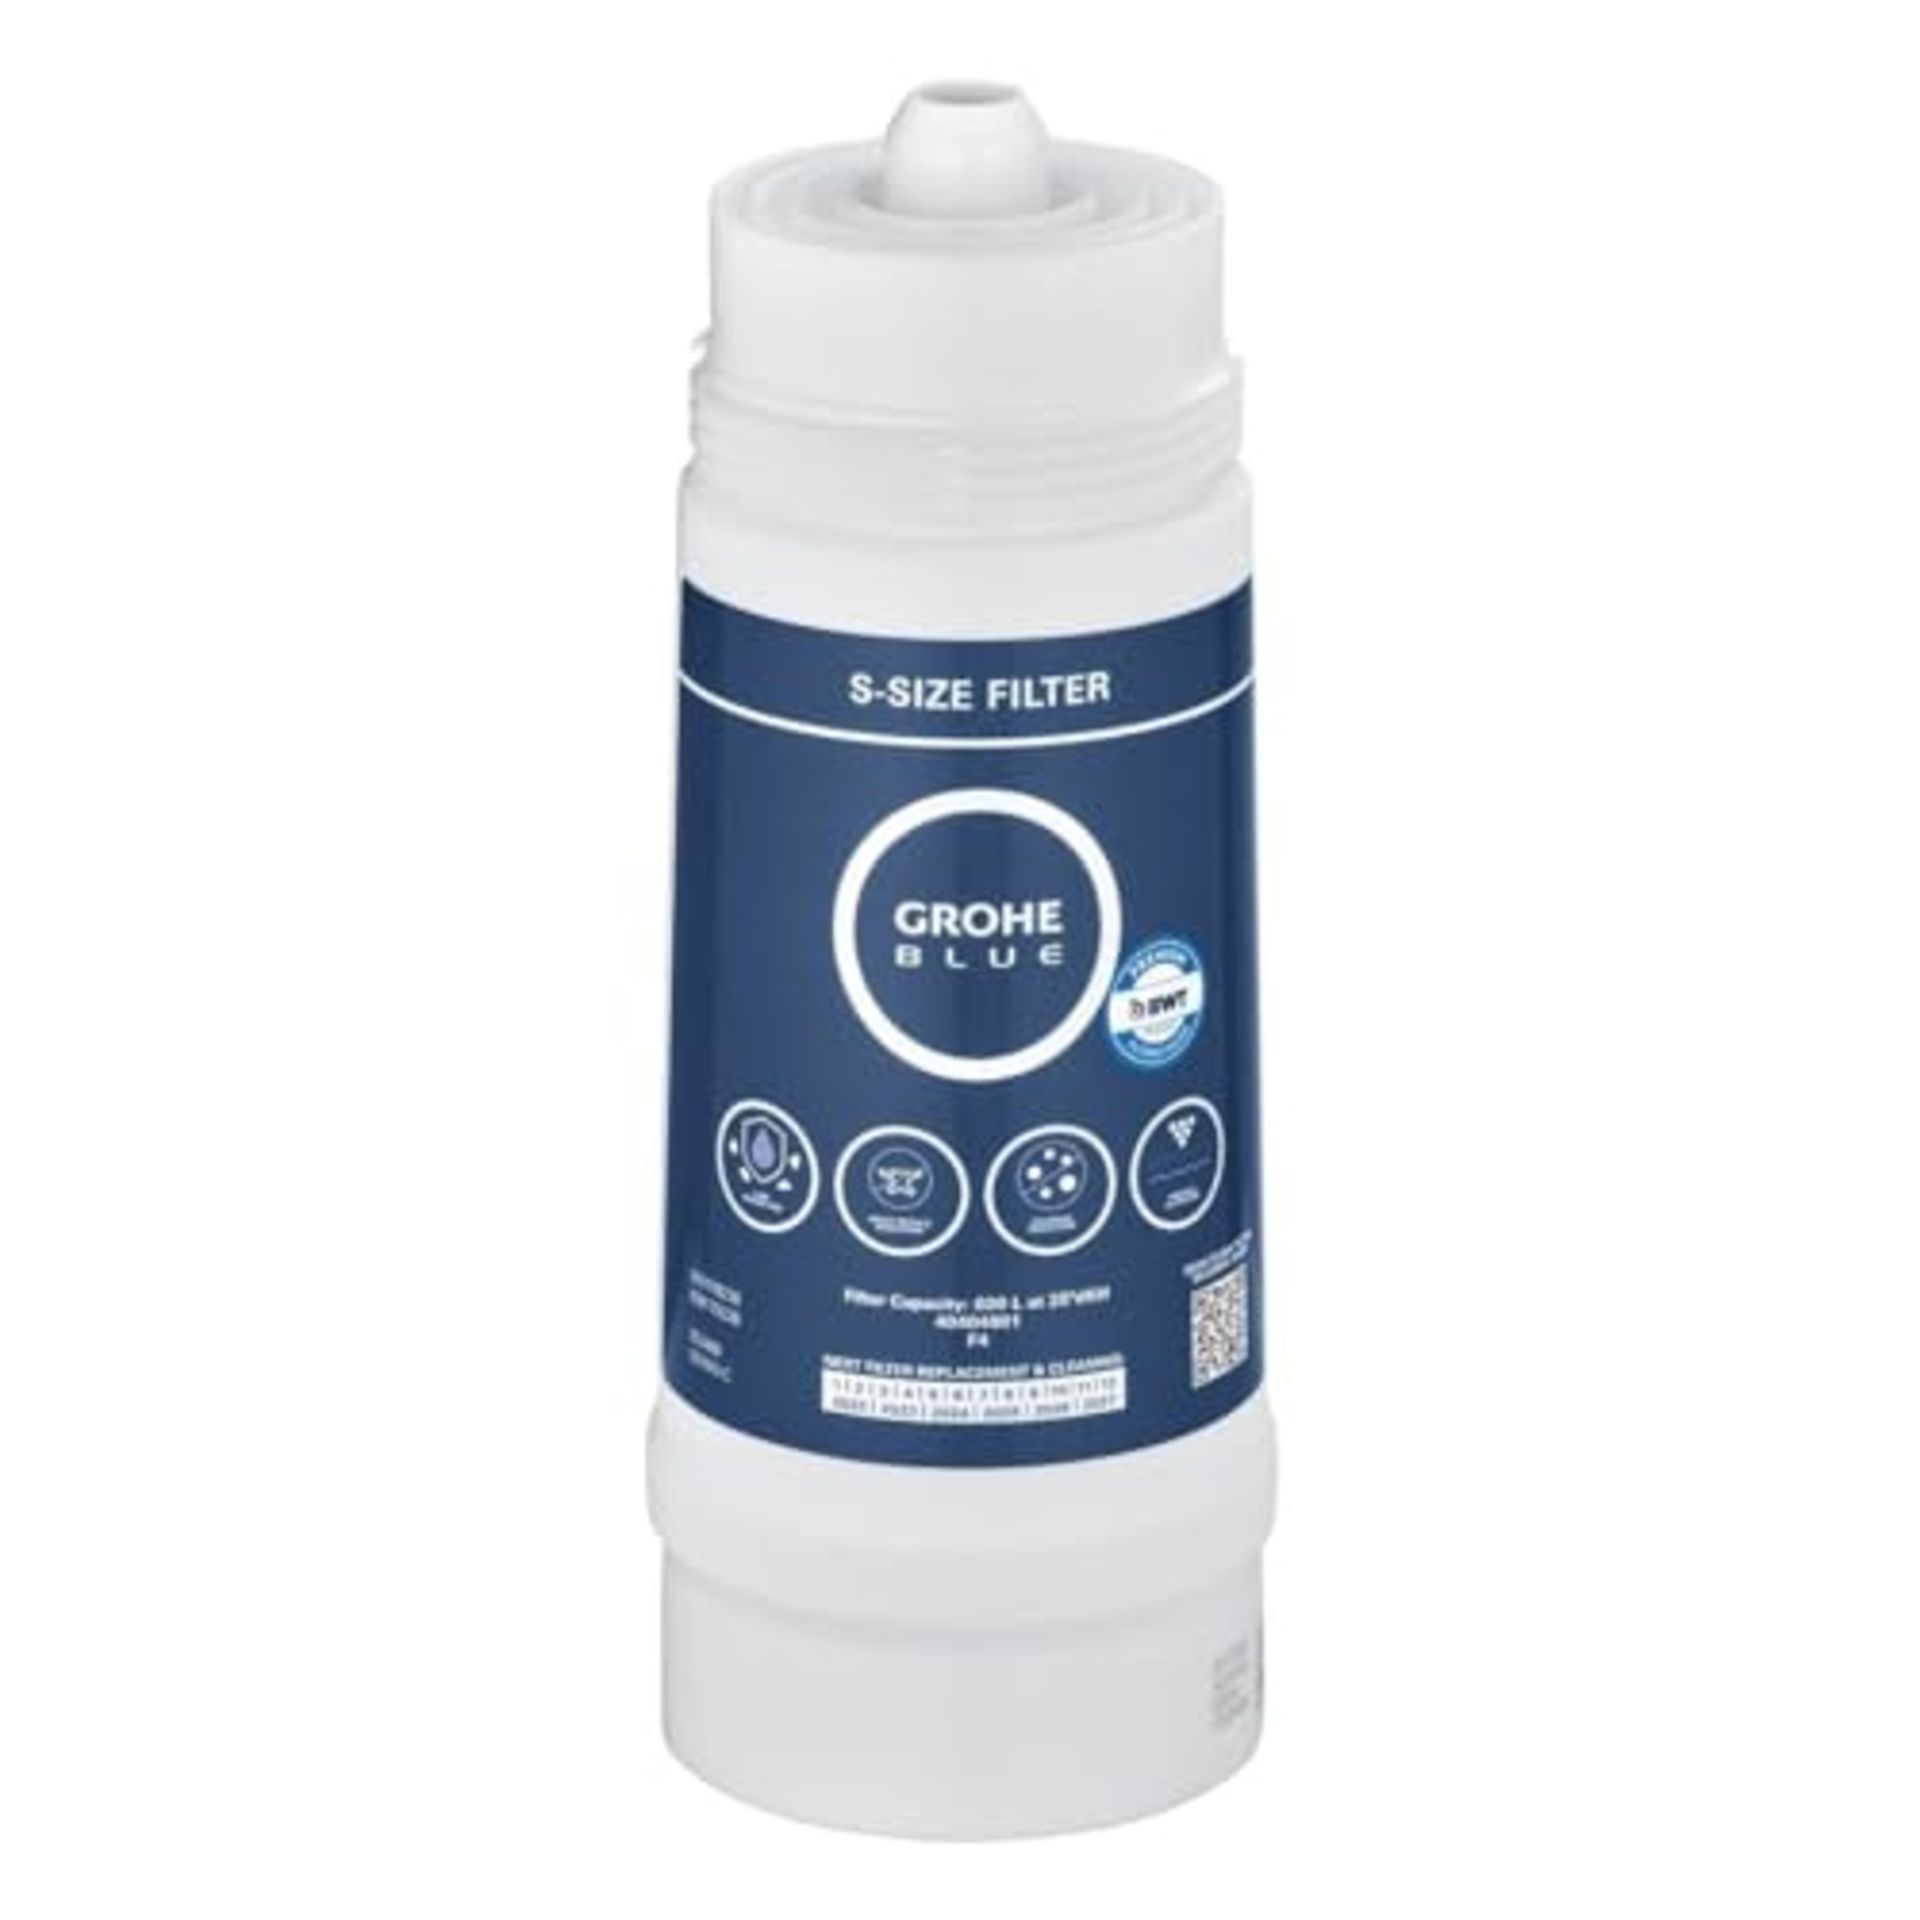 RRP £66.00 GROHE Blue - Replacement filter (S-Size, 600 liters at 20° dKH, 5-stage filter), 4040